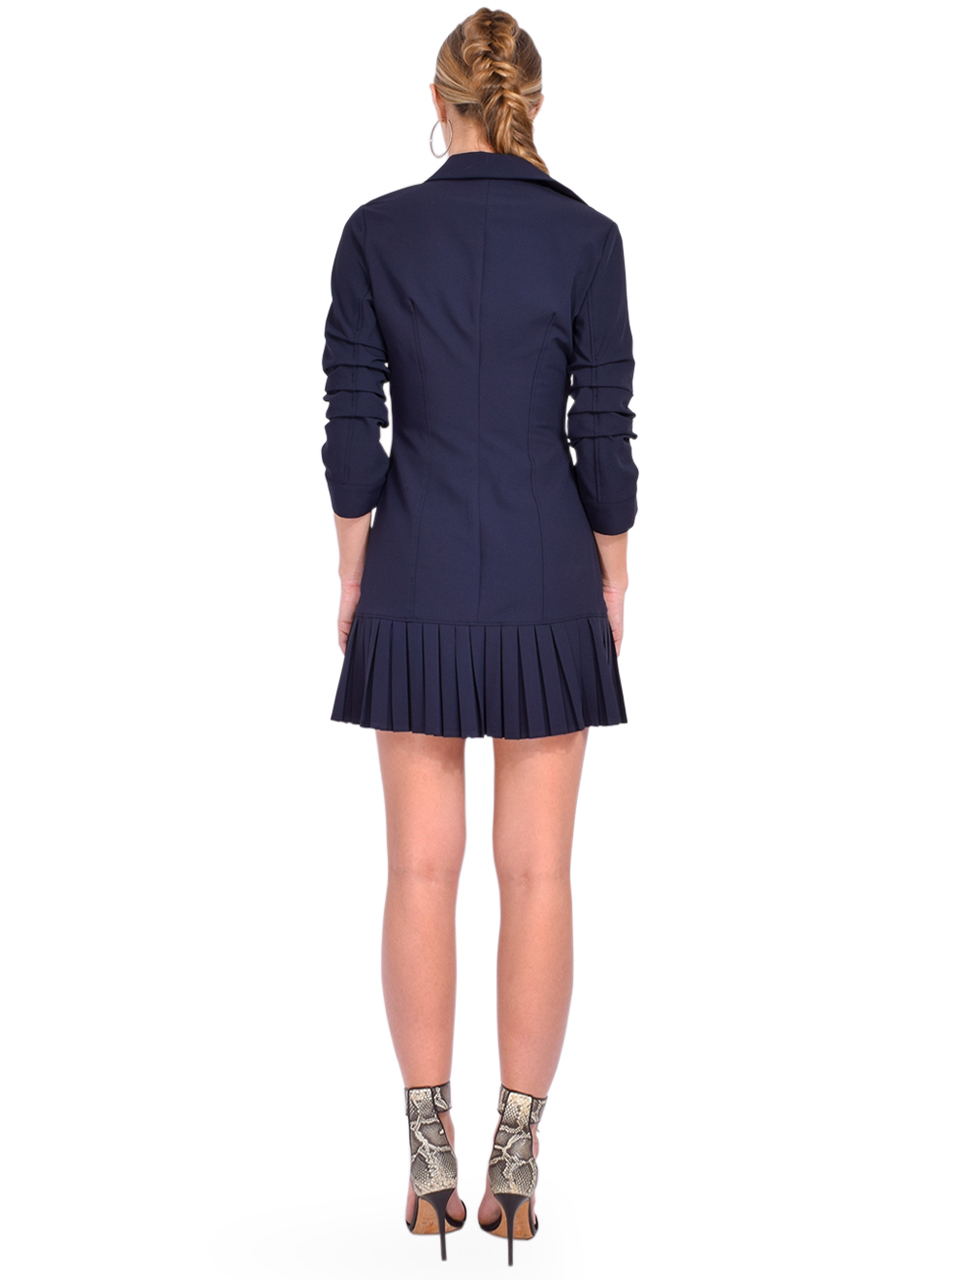 Cinq a Sept Lucilla Dress in Navy Back View 
